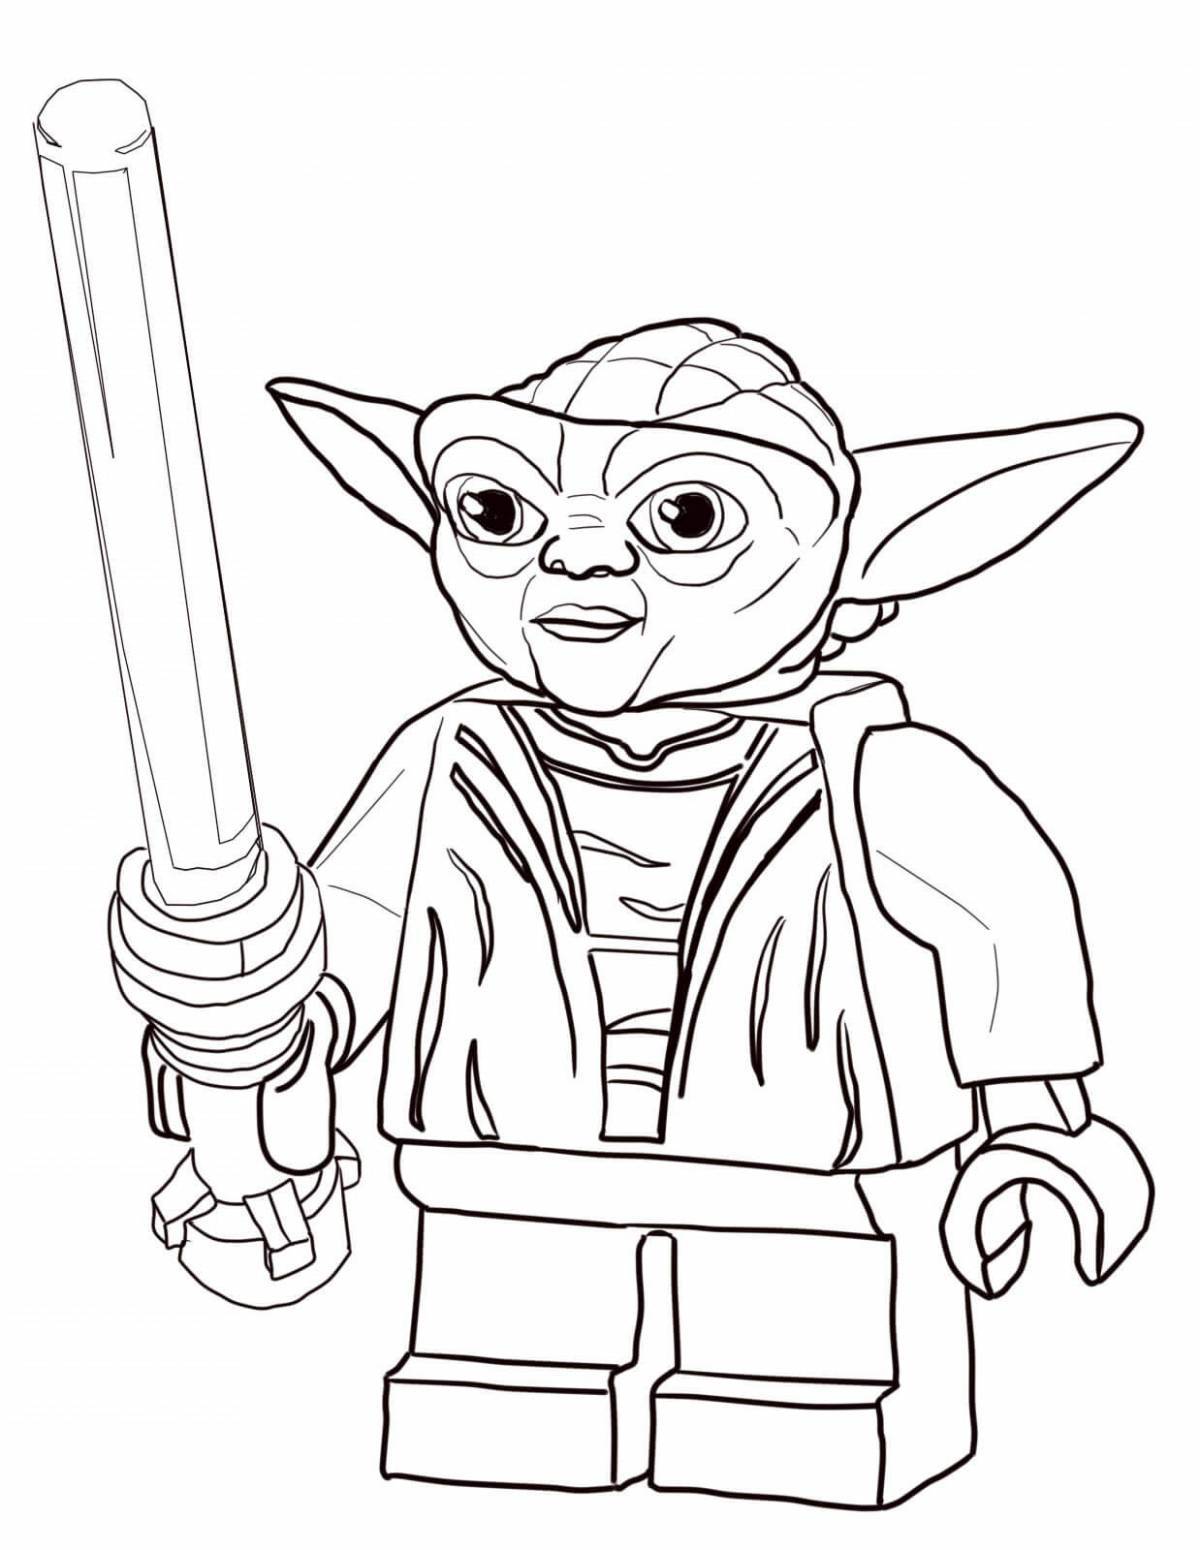 Yoda's awesome coloring book